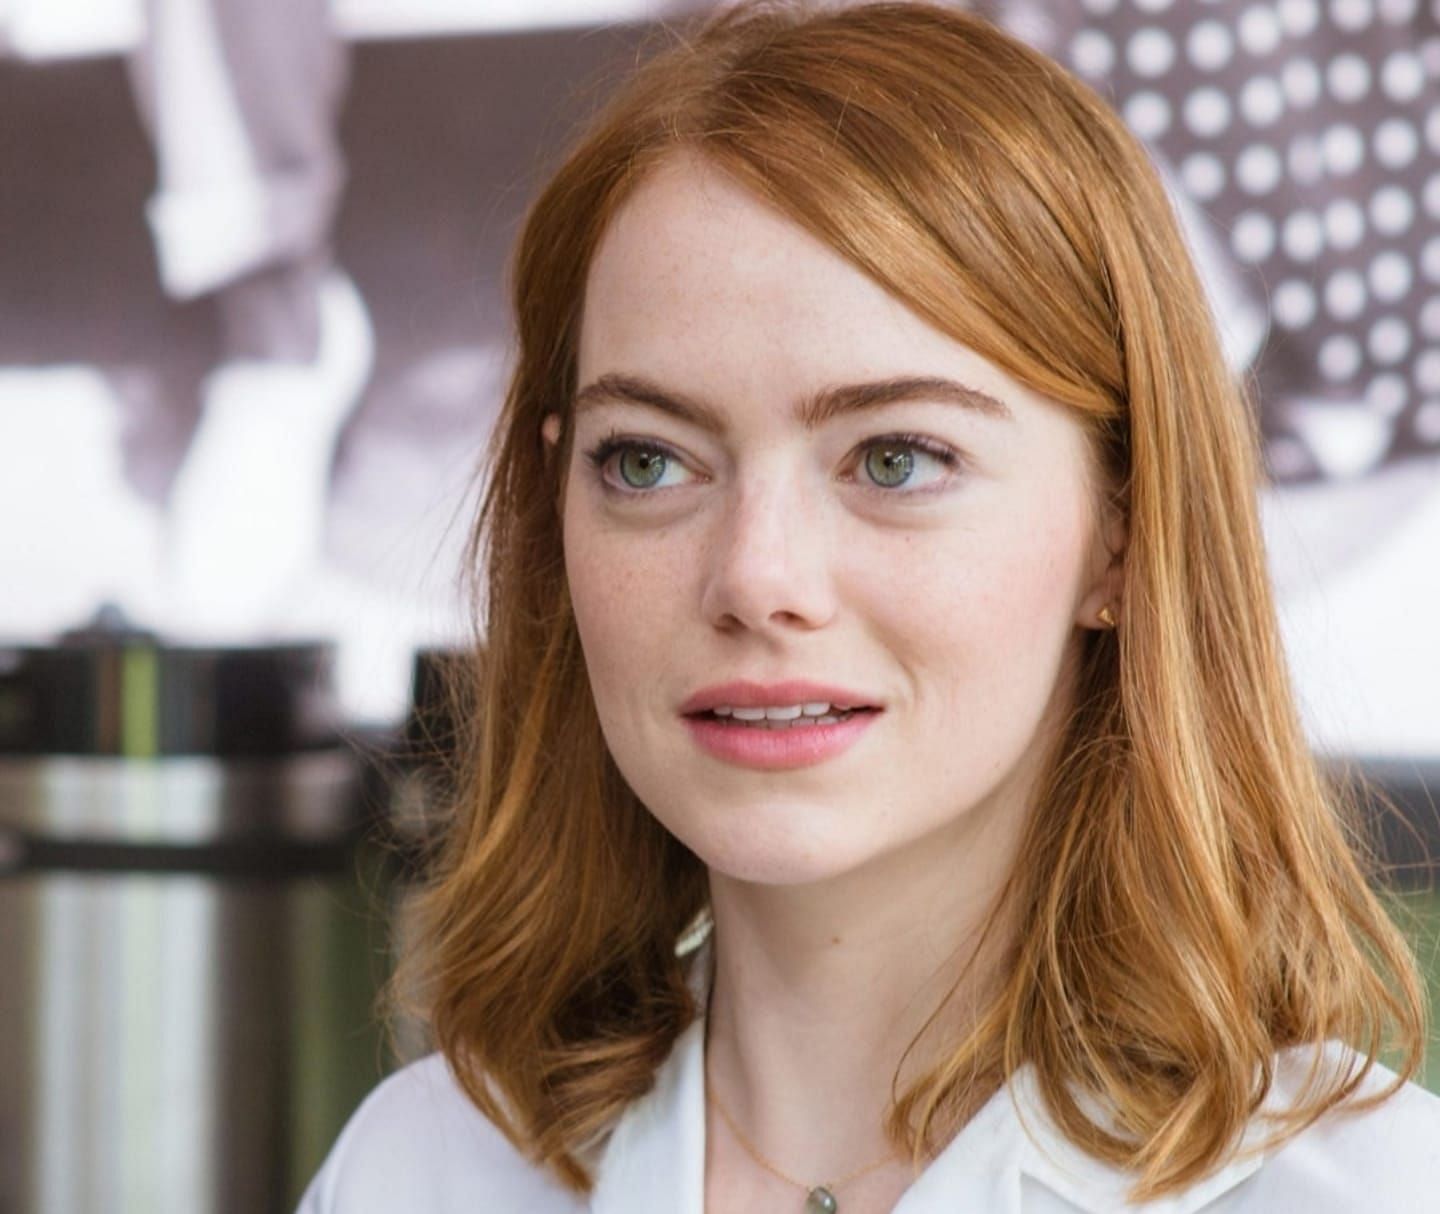 How much is Emma Stone's net worth as of 2023?